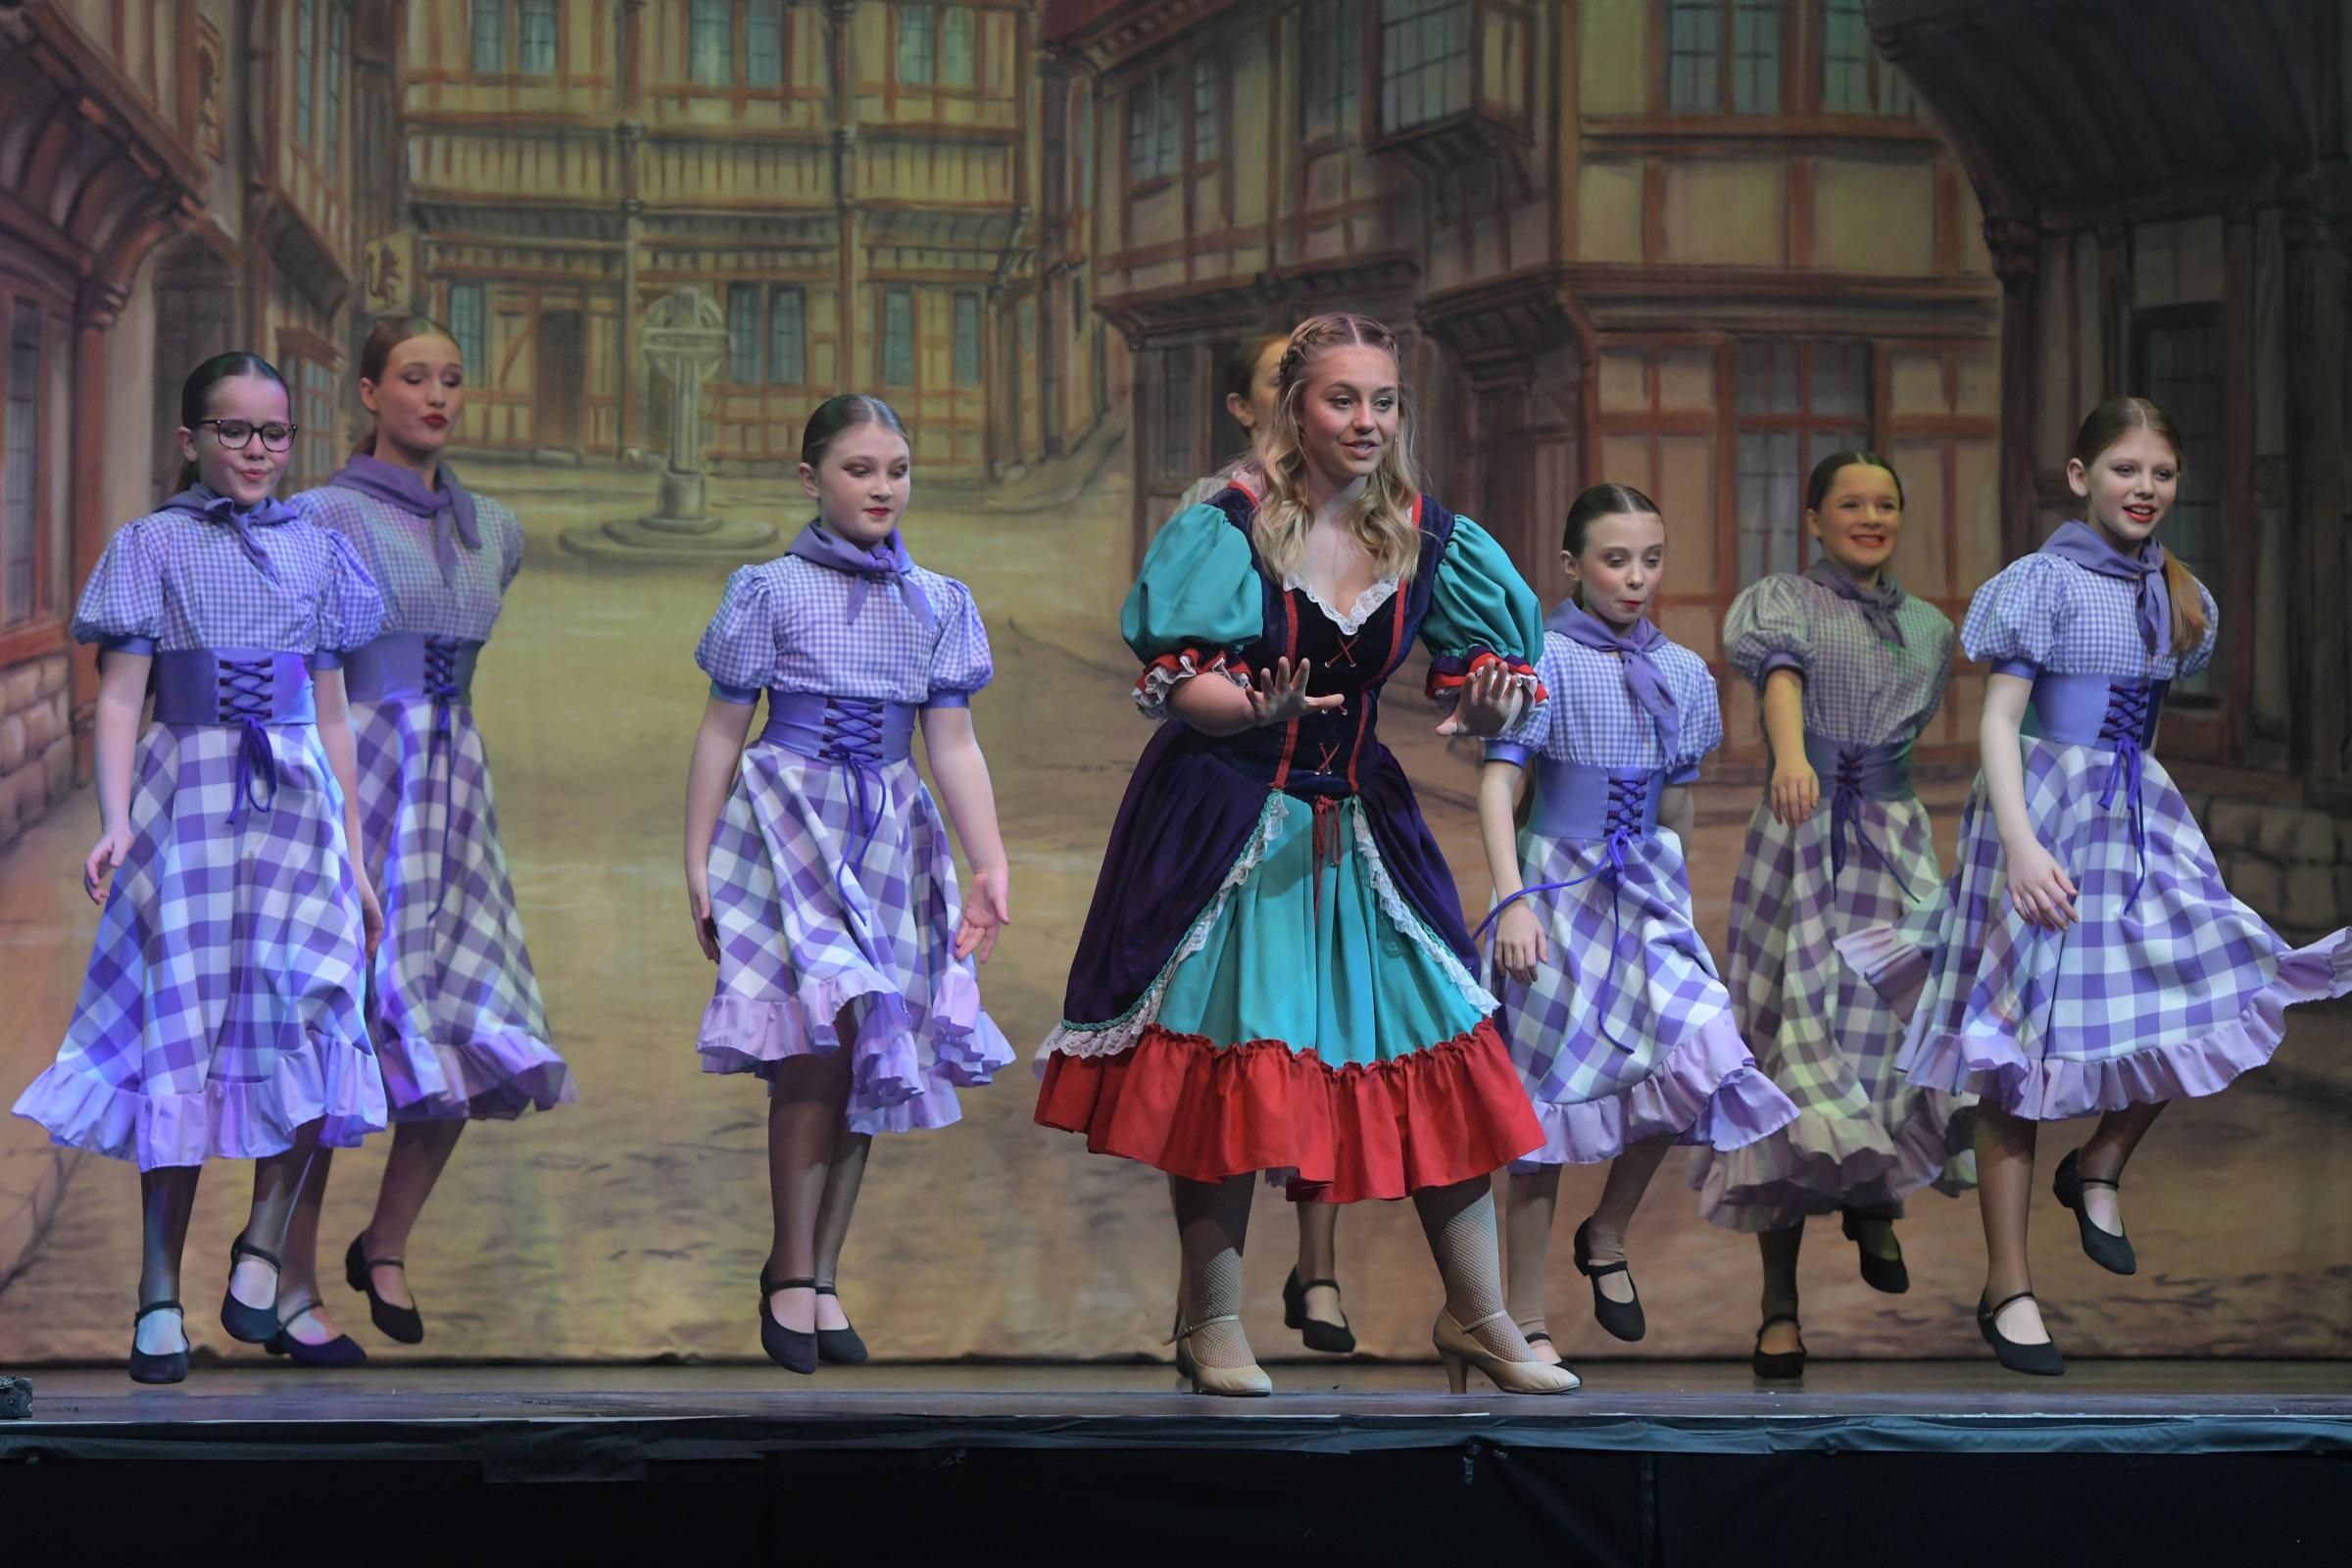 Dick Whittington launched at Parr Hall on Friday